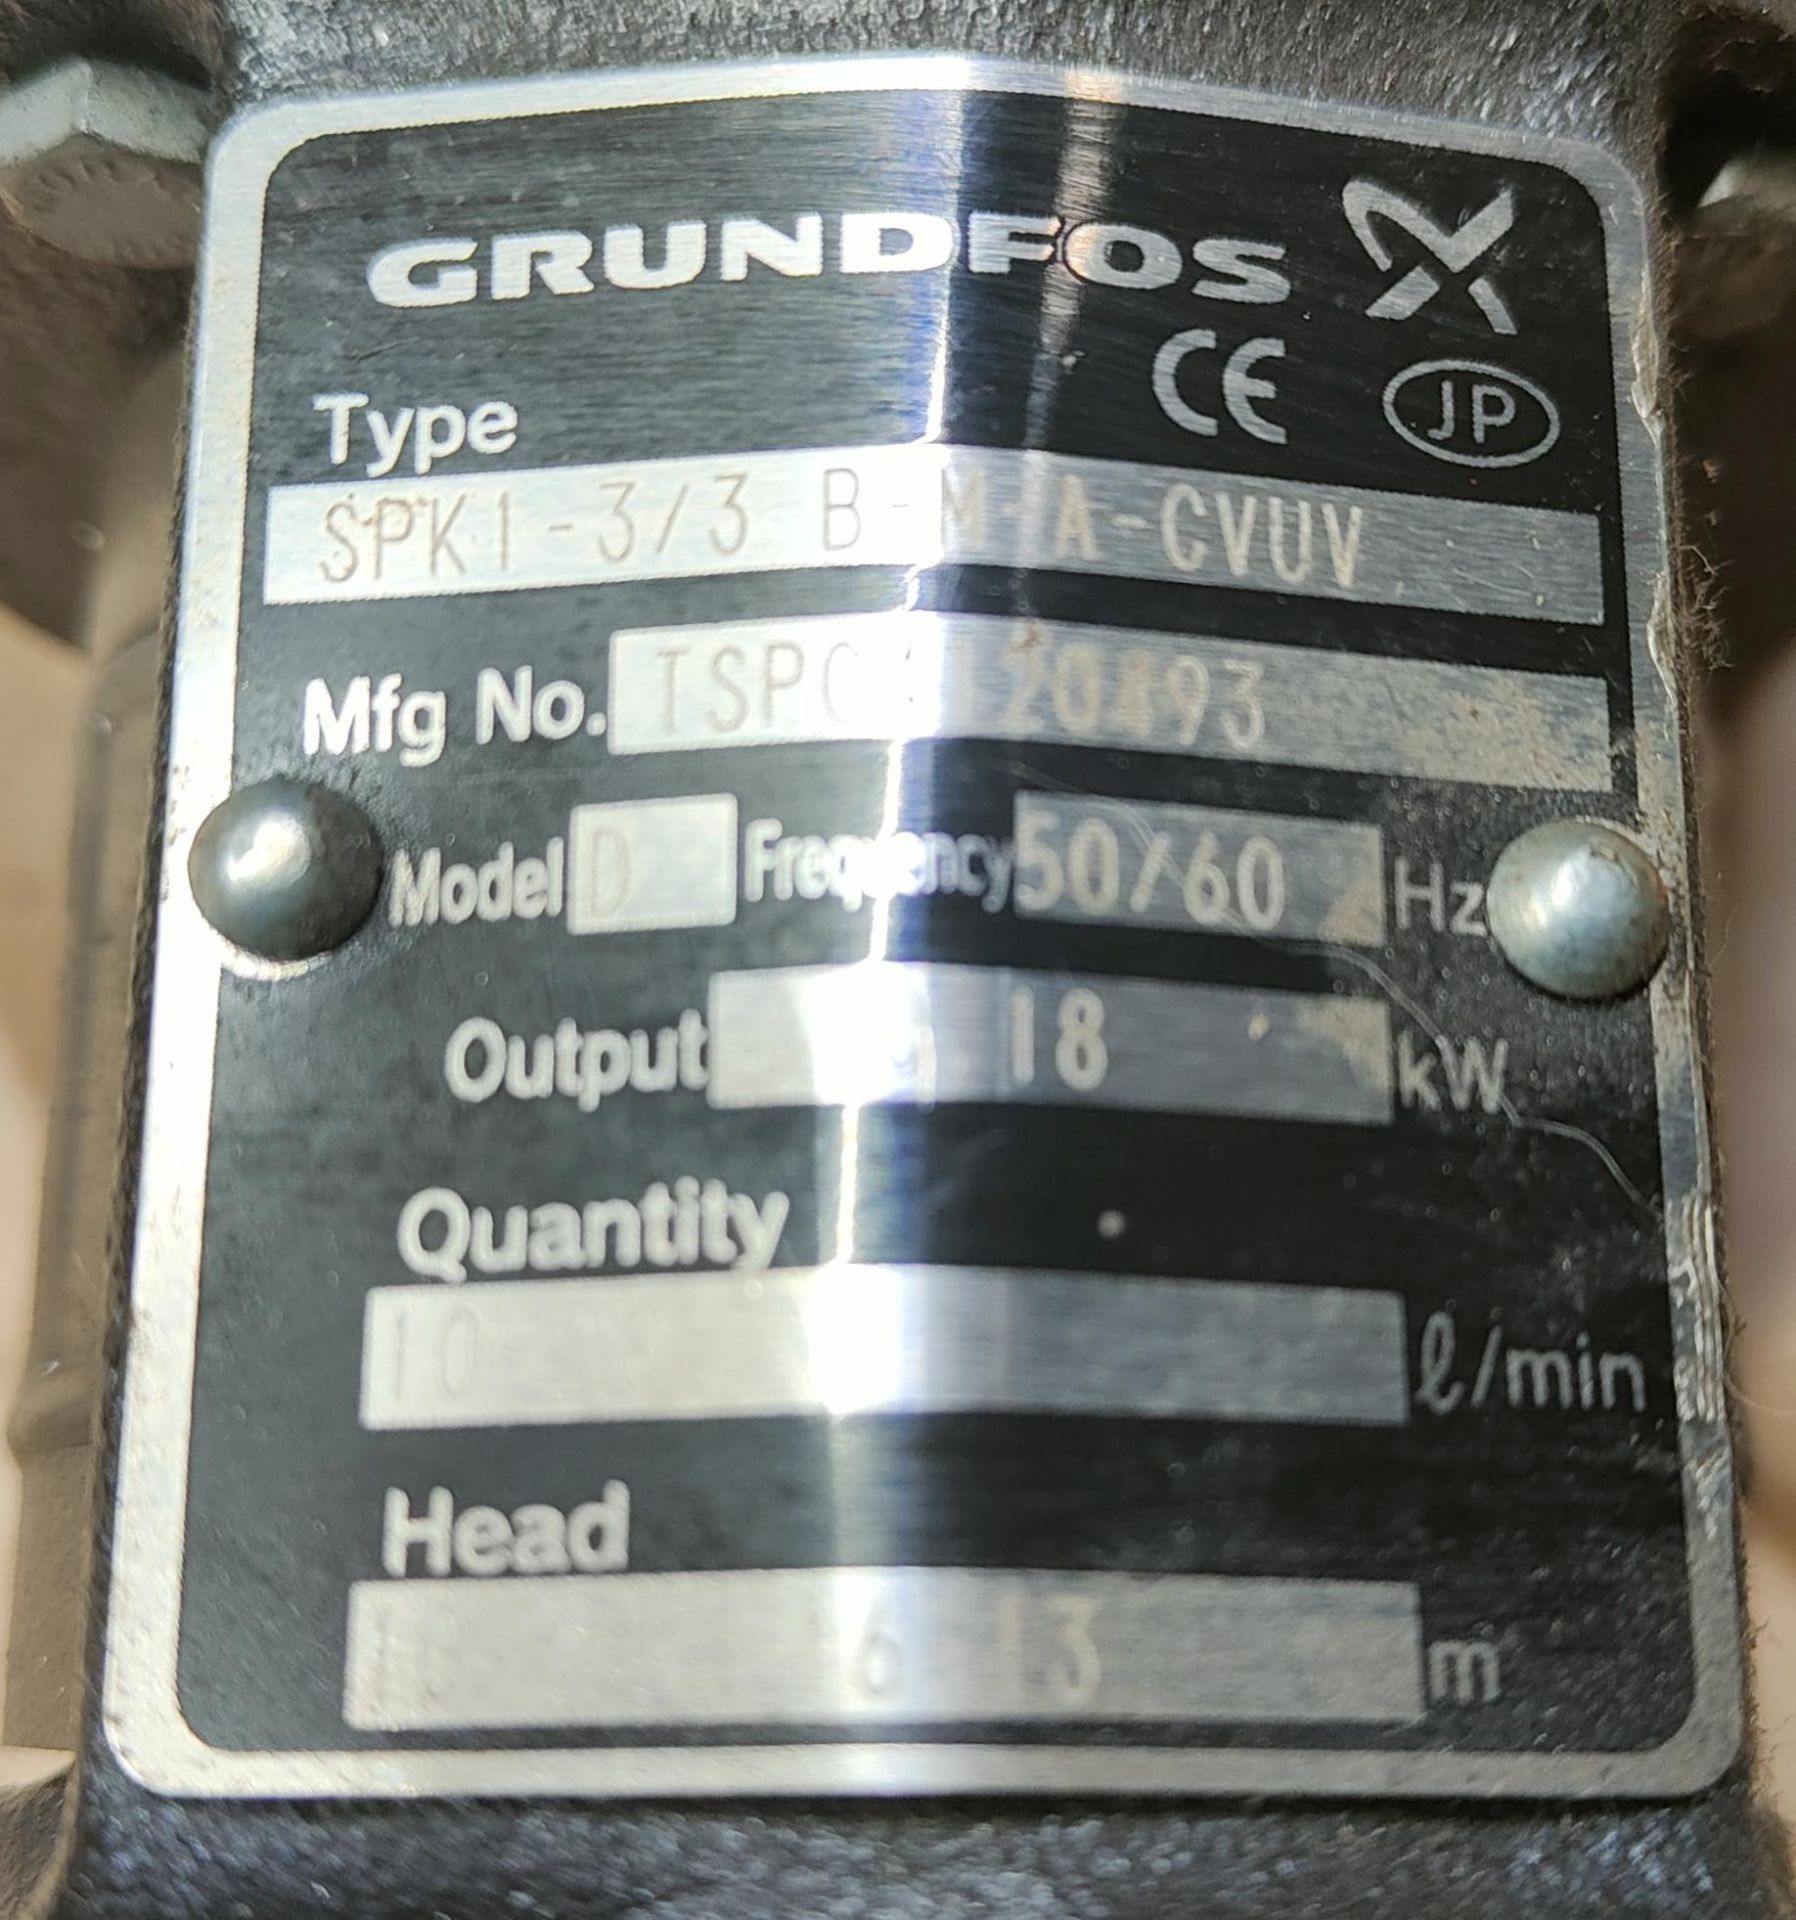 Grundfos SPK1-3/3 Electric Motor, serial no. TSP0540493, loading free of charge - yes (vendors - Image 2 of 2